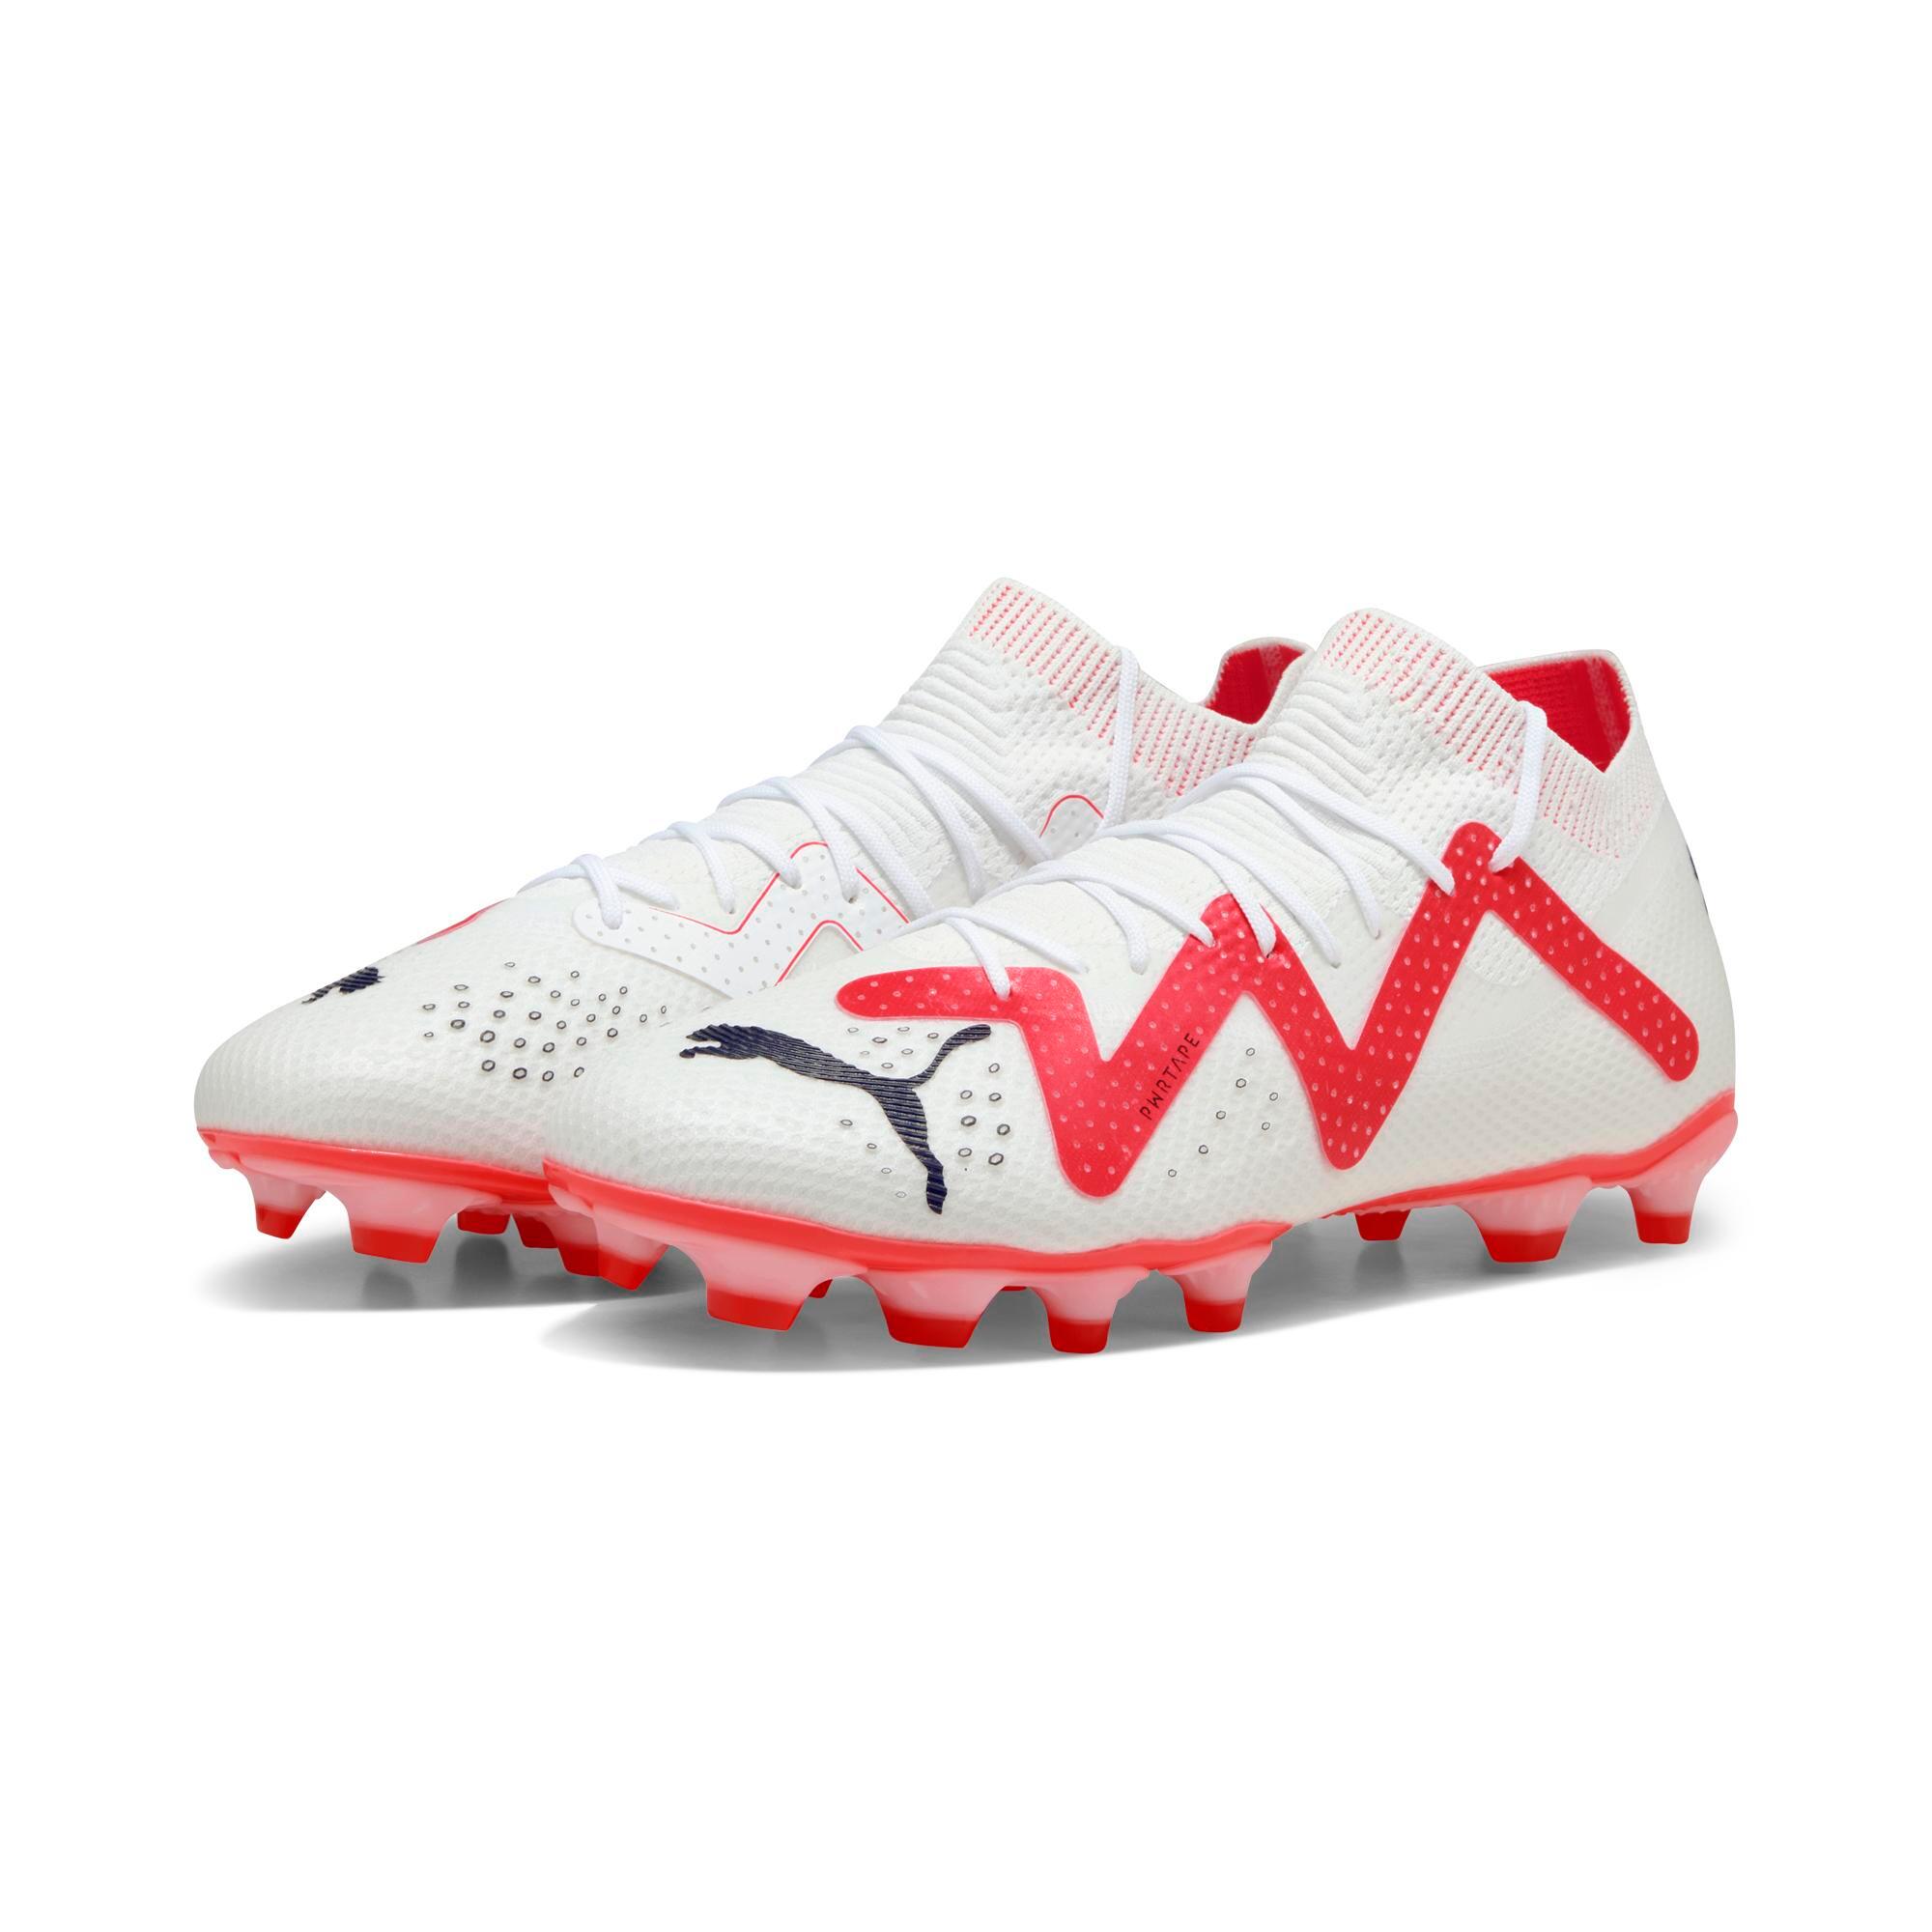 Adult FG/AG Future Pro - White/Red 6/6